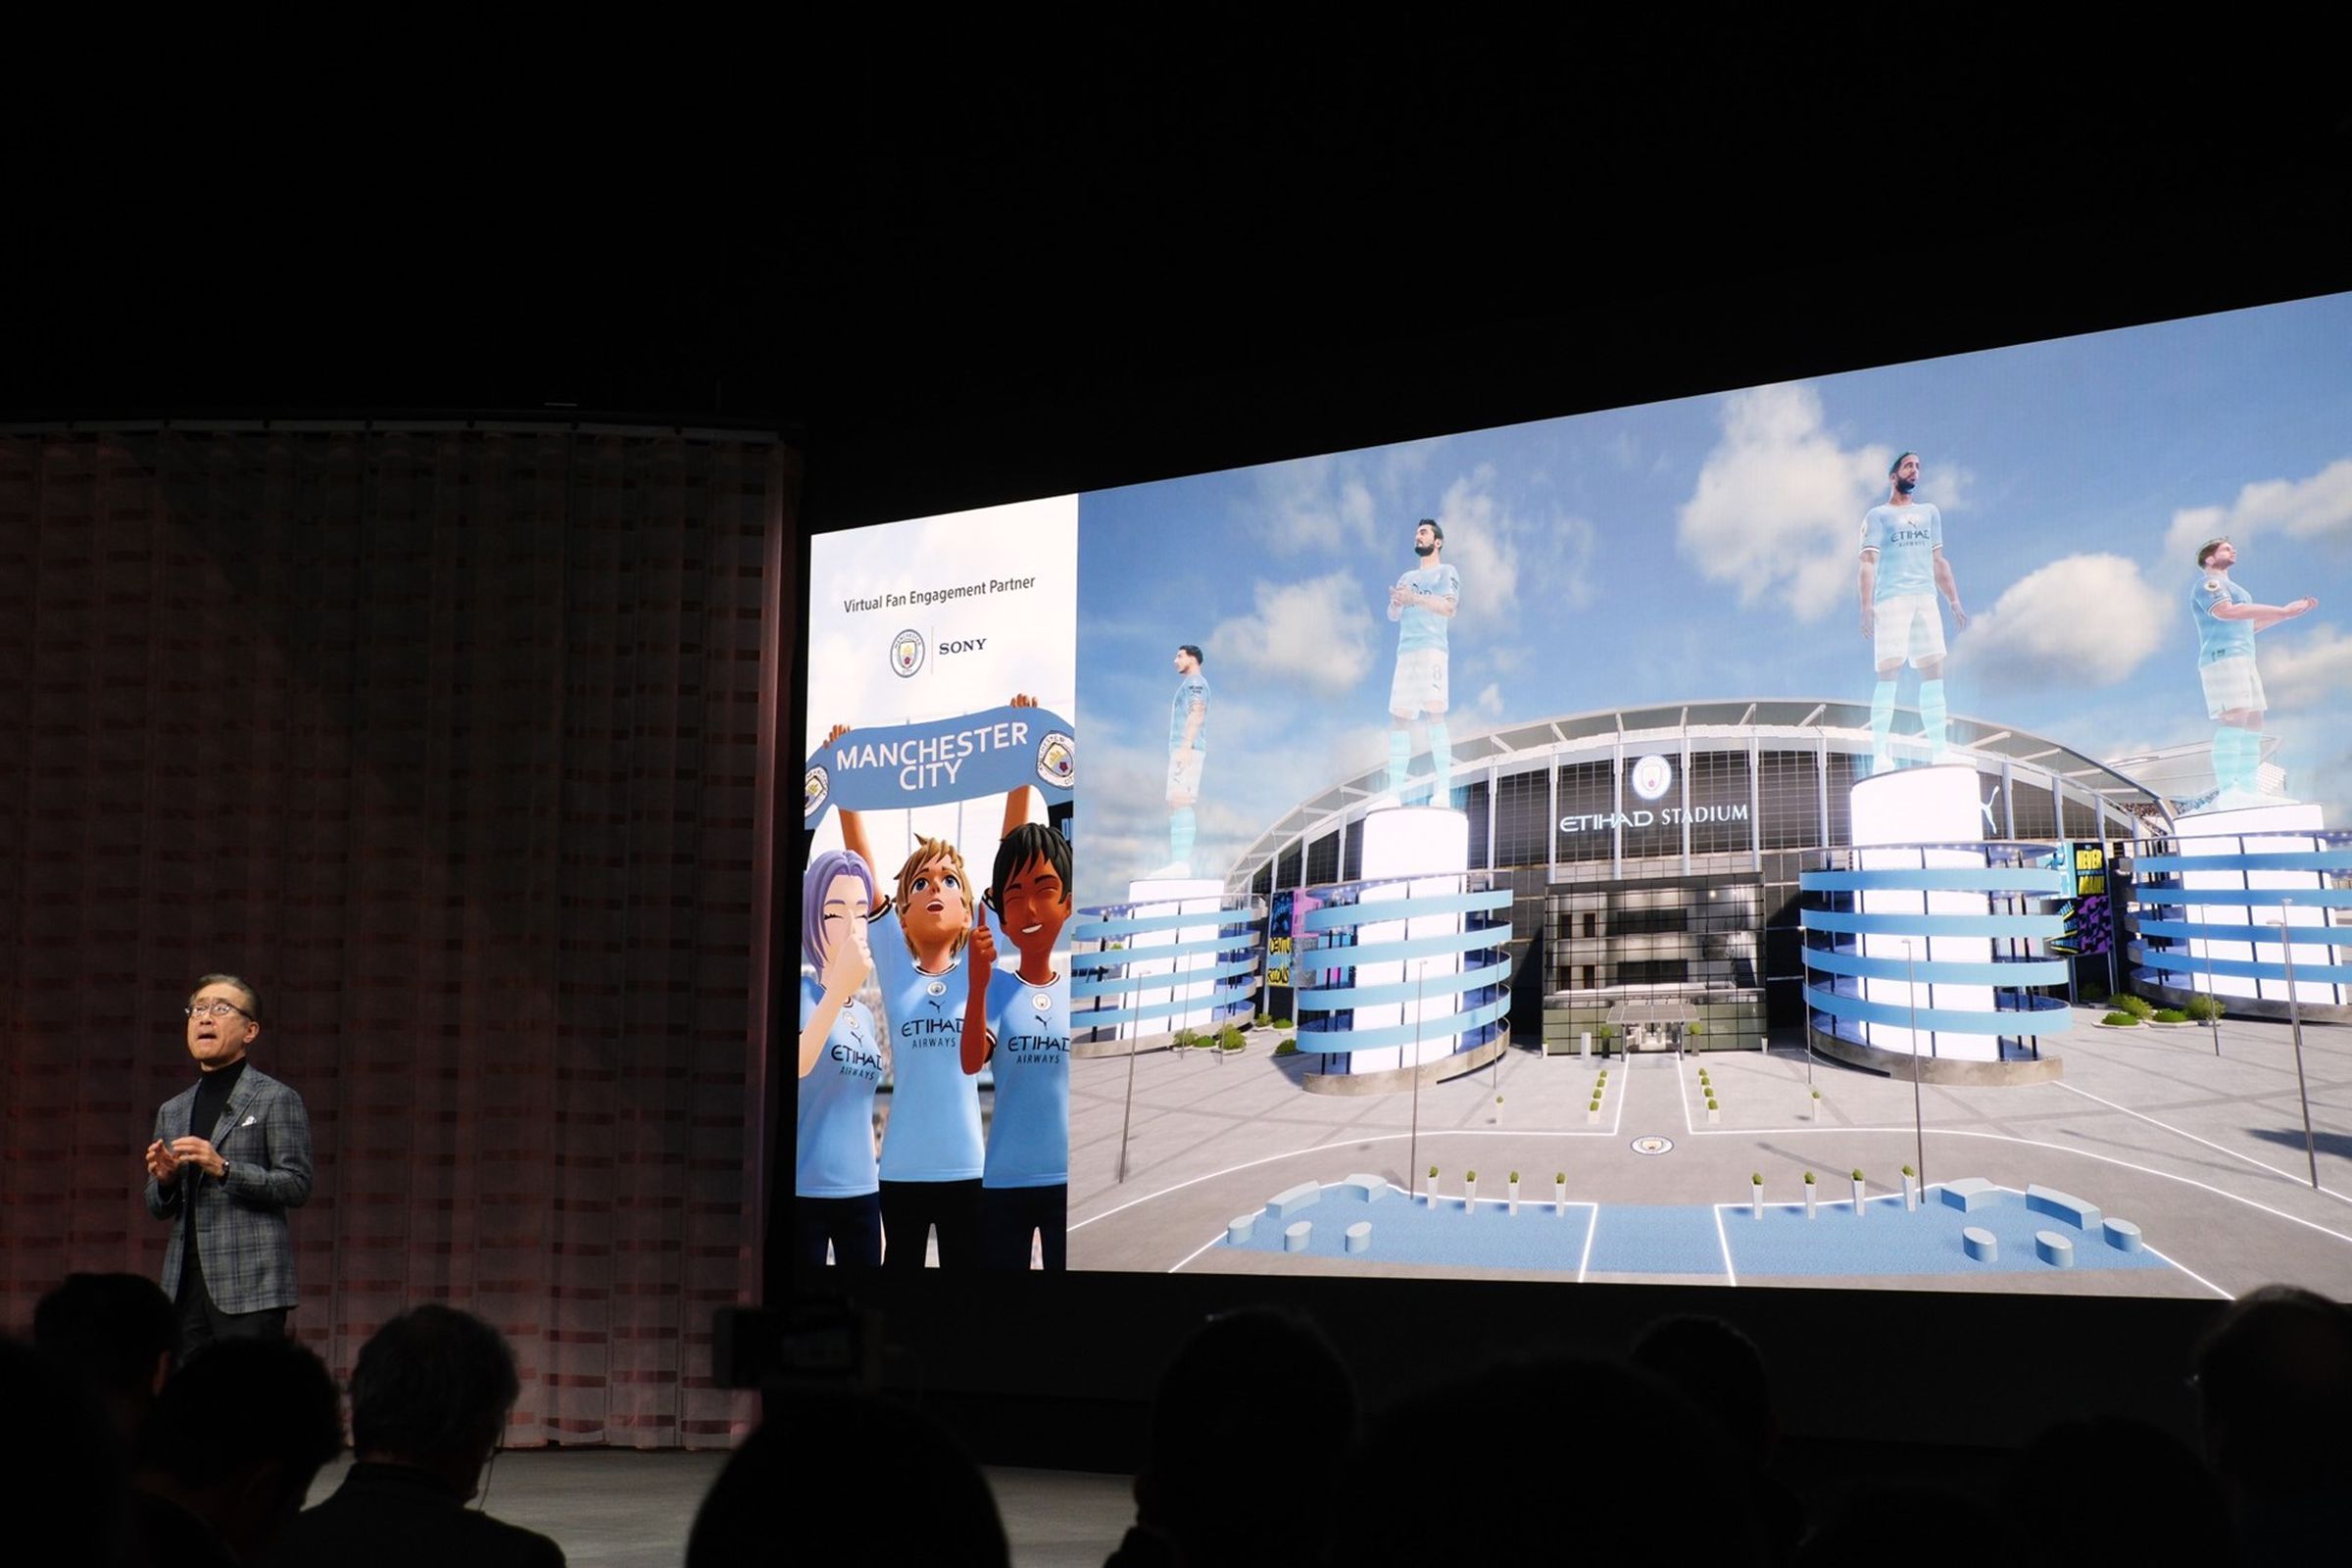 Sony CEO Kenichiro Yoshida discusses the company's project with Manchester City on stage at CES.